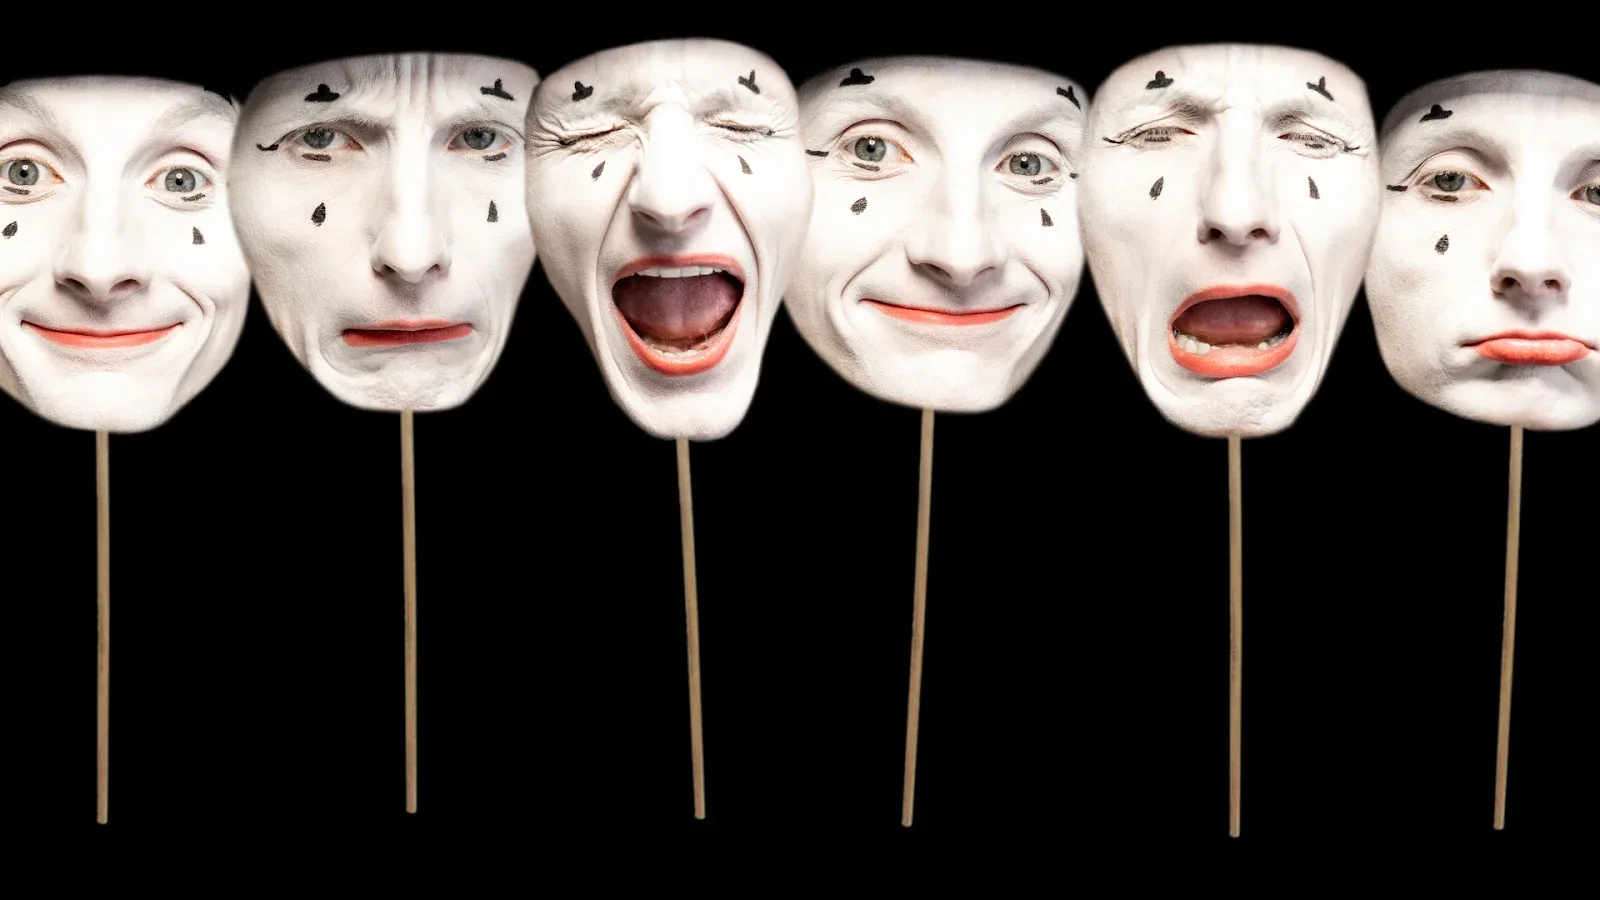 mime faces showing various emotions